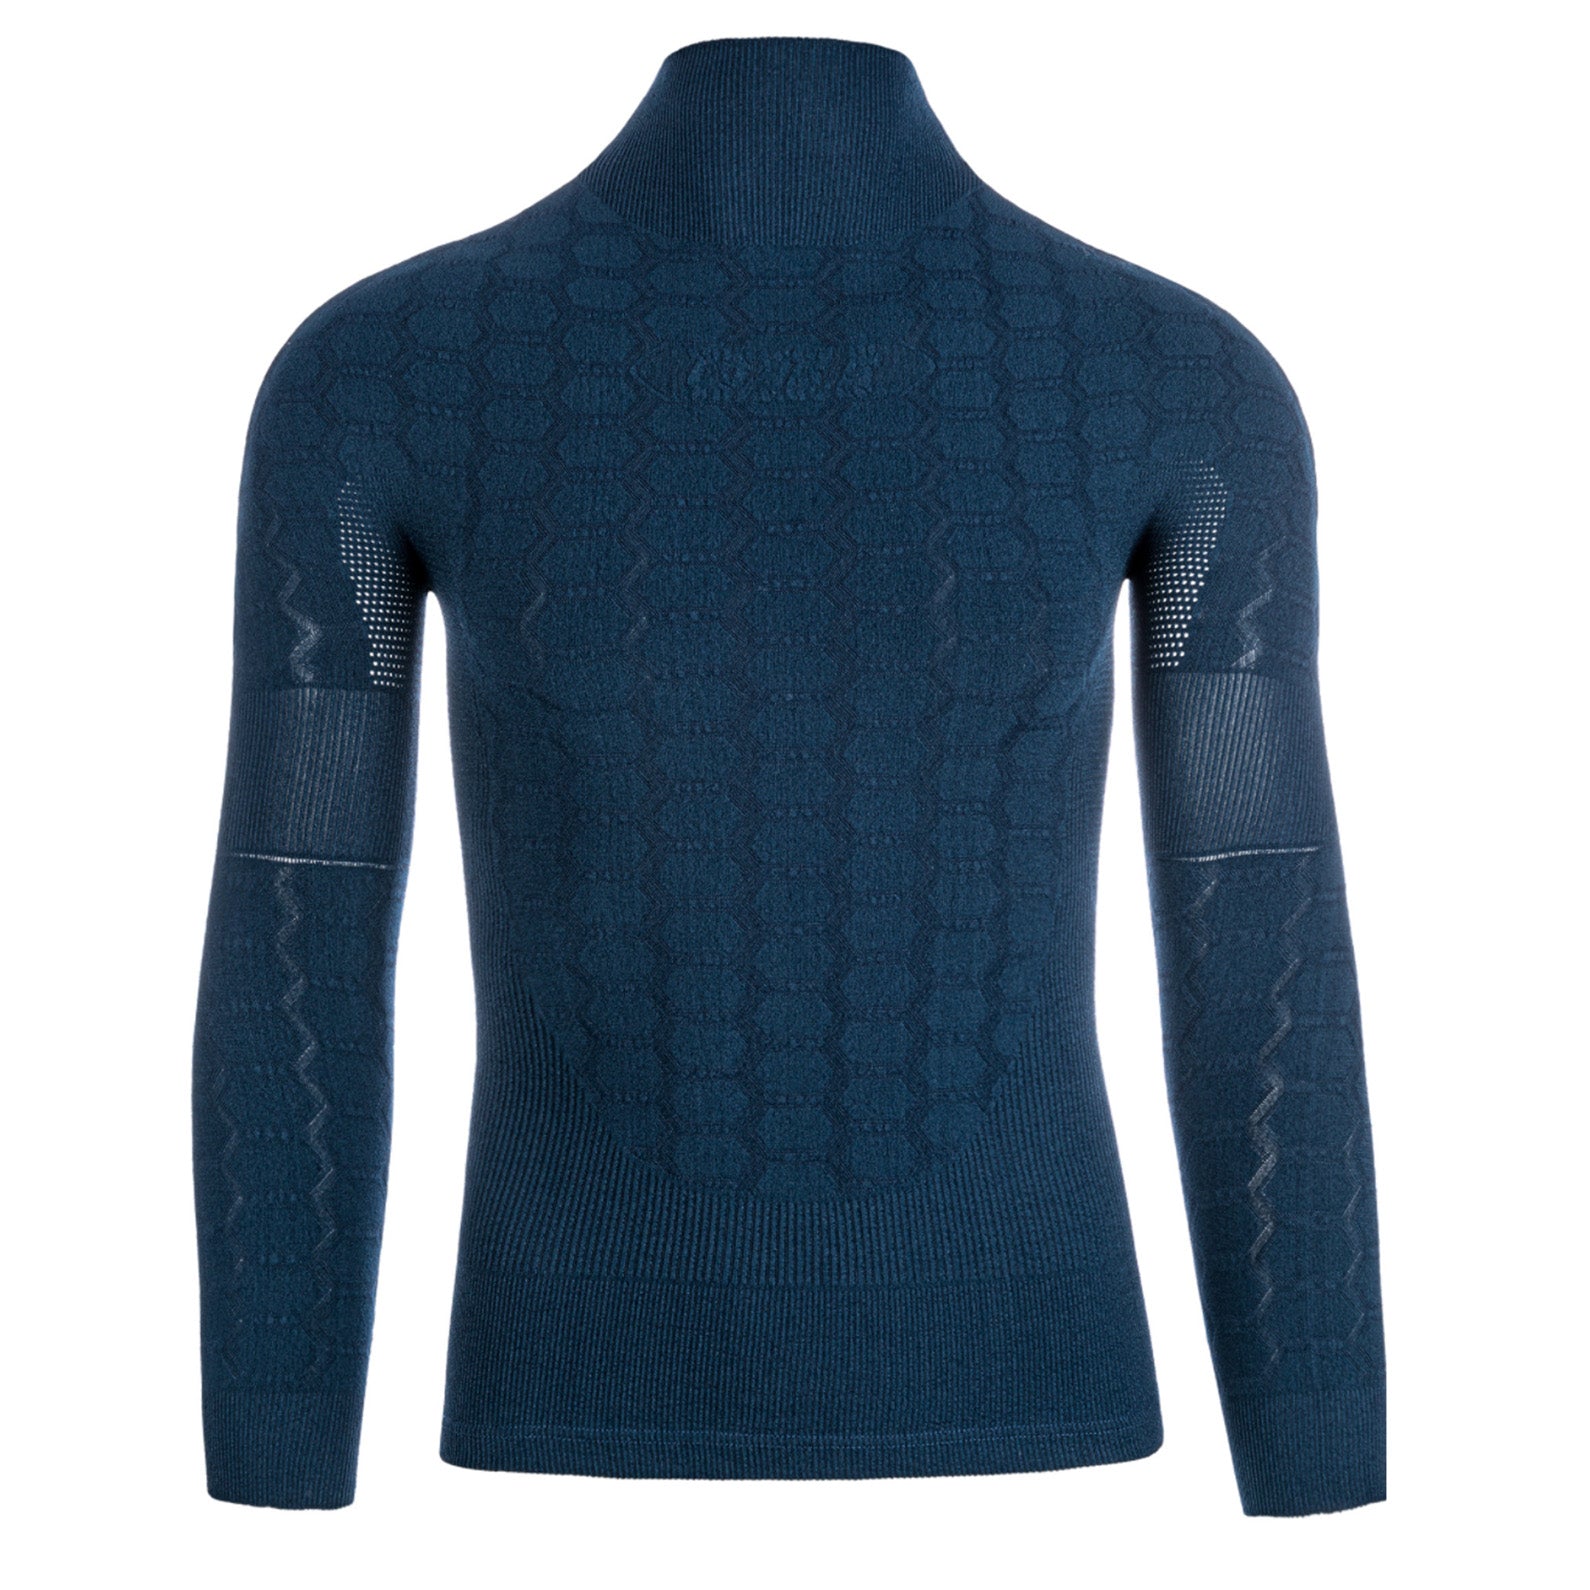 Q36.5 Base Layer 4 Long Sleeve in Navy